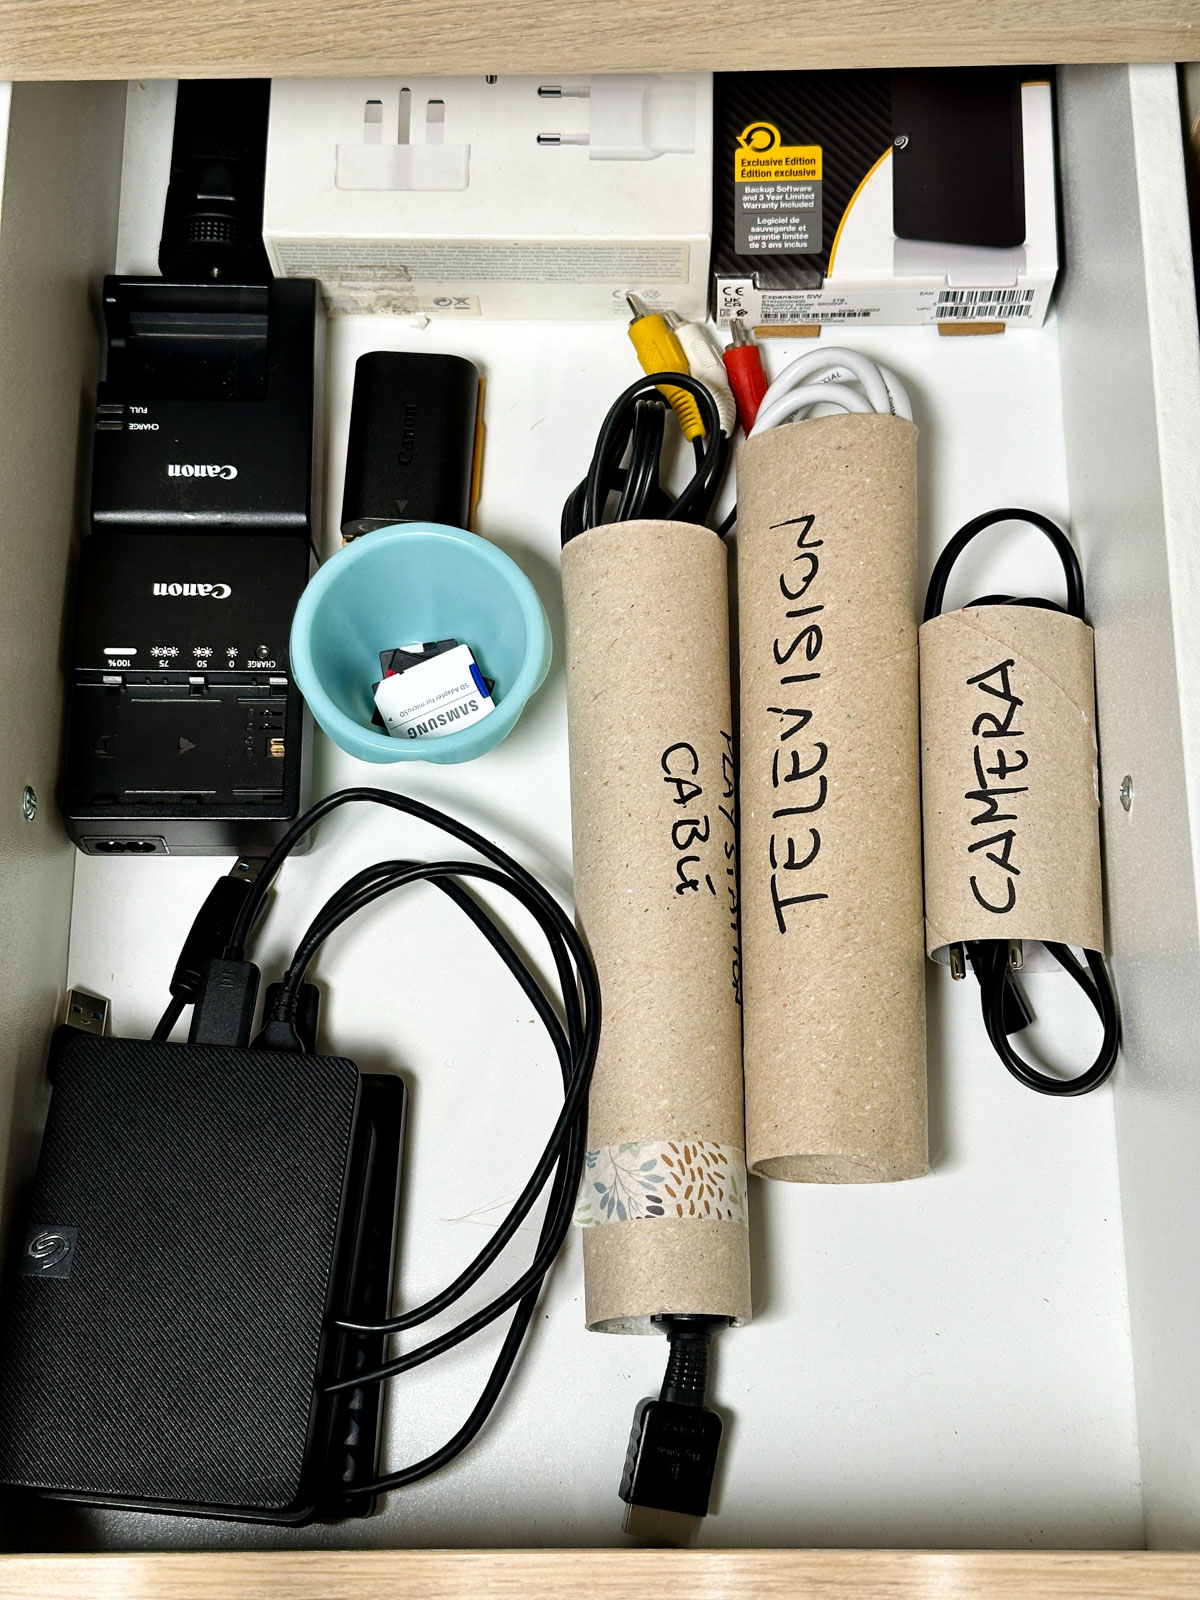 Use Toilet Paper Rolls to Store Cables